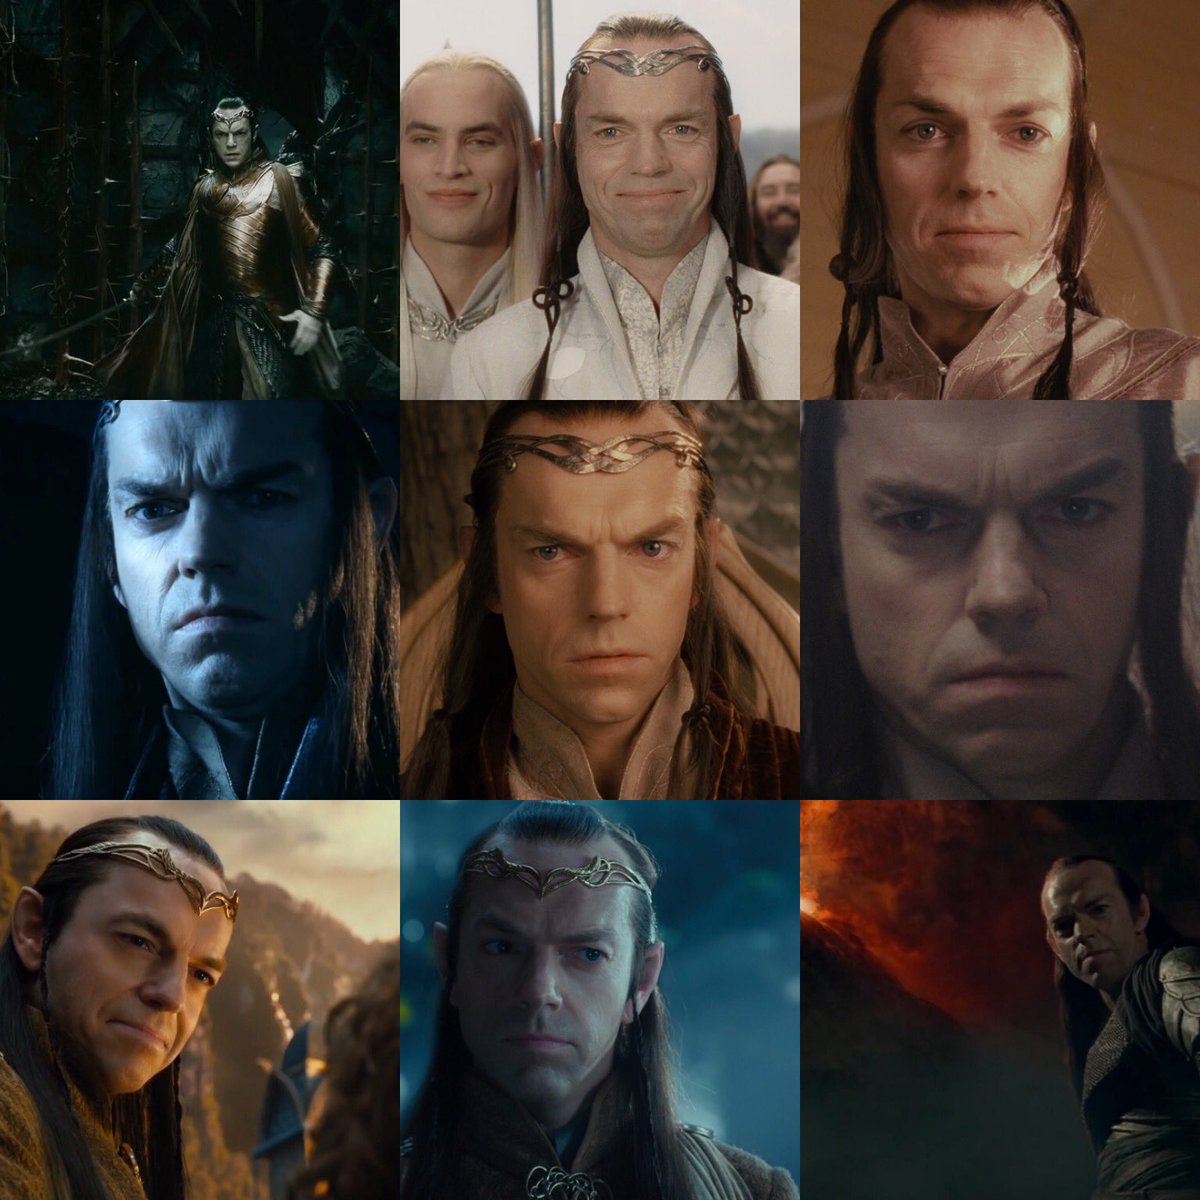 The lord of Rivendell, lord Elrond